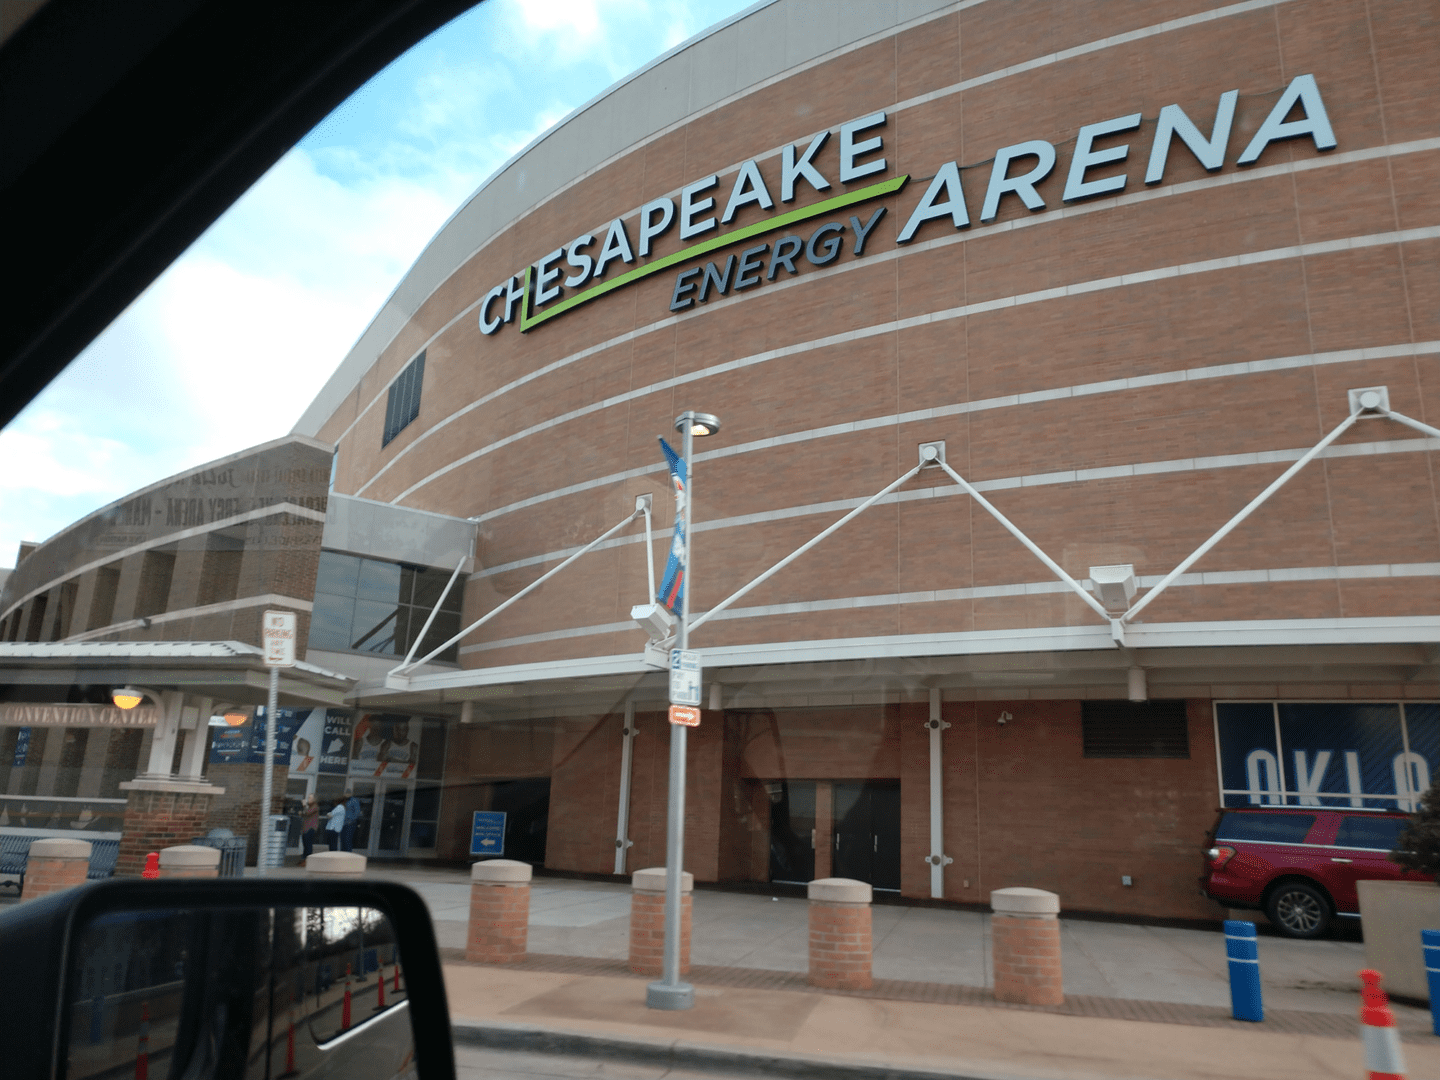 A picture of the outside of chesapeake arena.